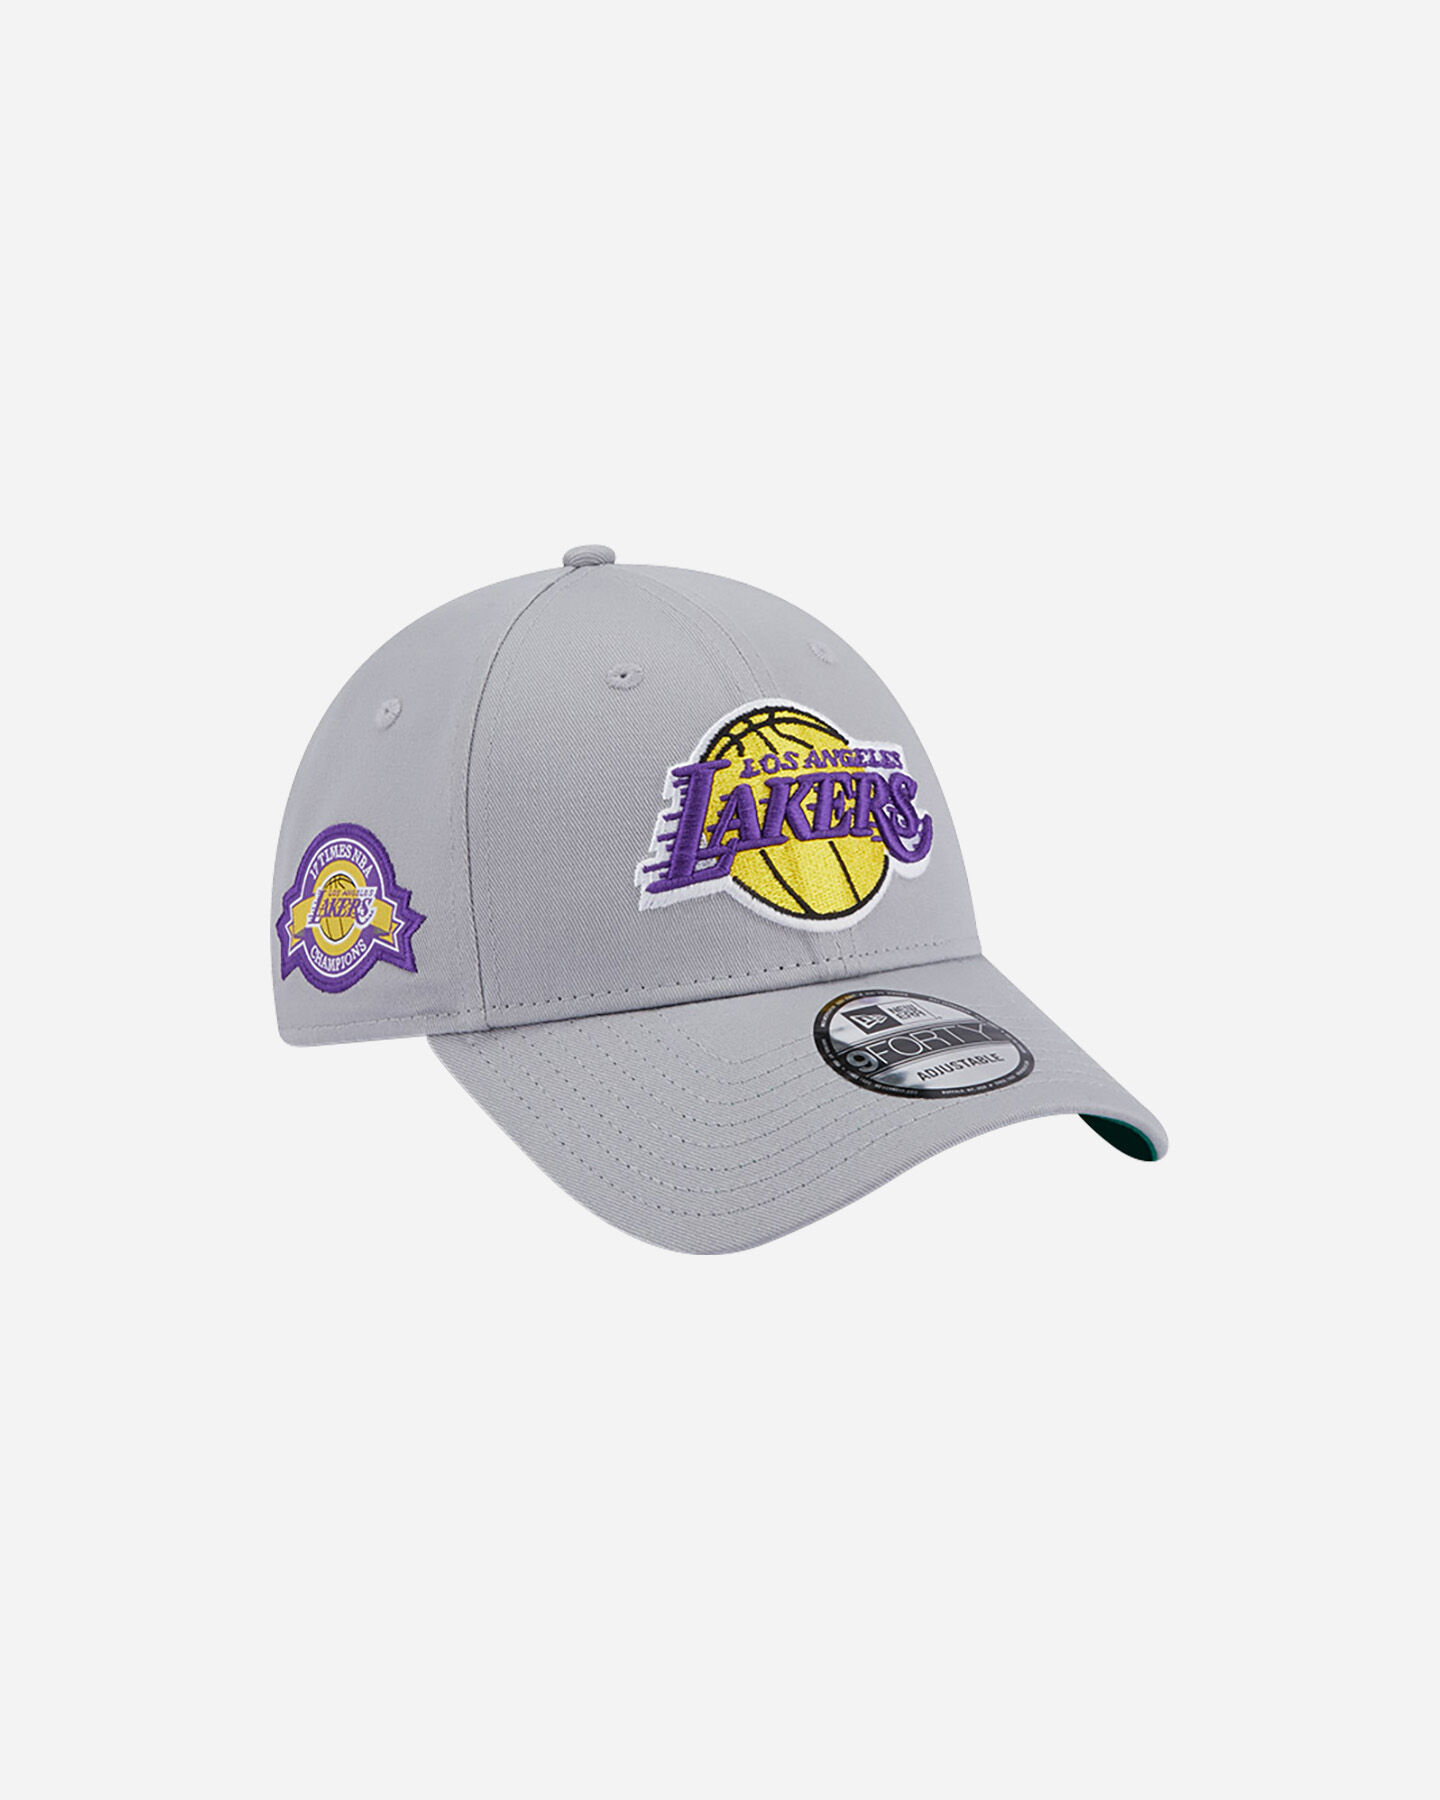  Cappellino NEW ERA 9FORTY TEAM SIDE PATCH LOS ANGELES LAKERS  S5606220|020|OSFM scatto 2